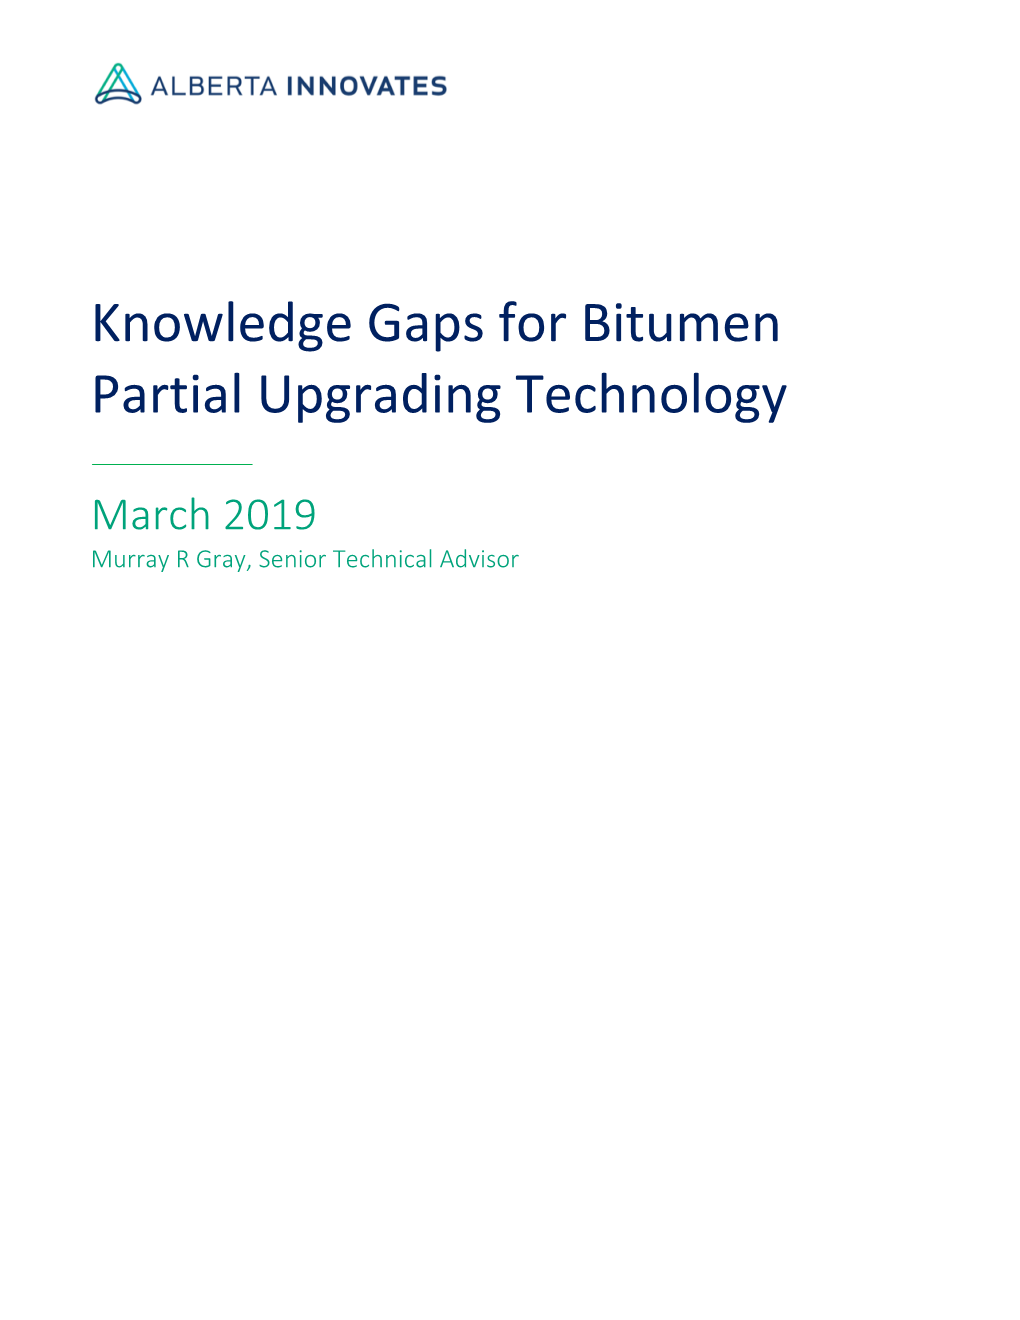 Knowledge Gaps for Bitumen Partial Upgrading Technology